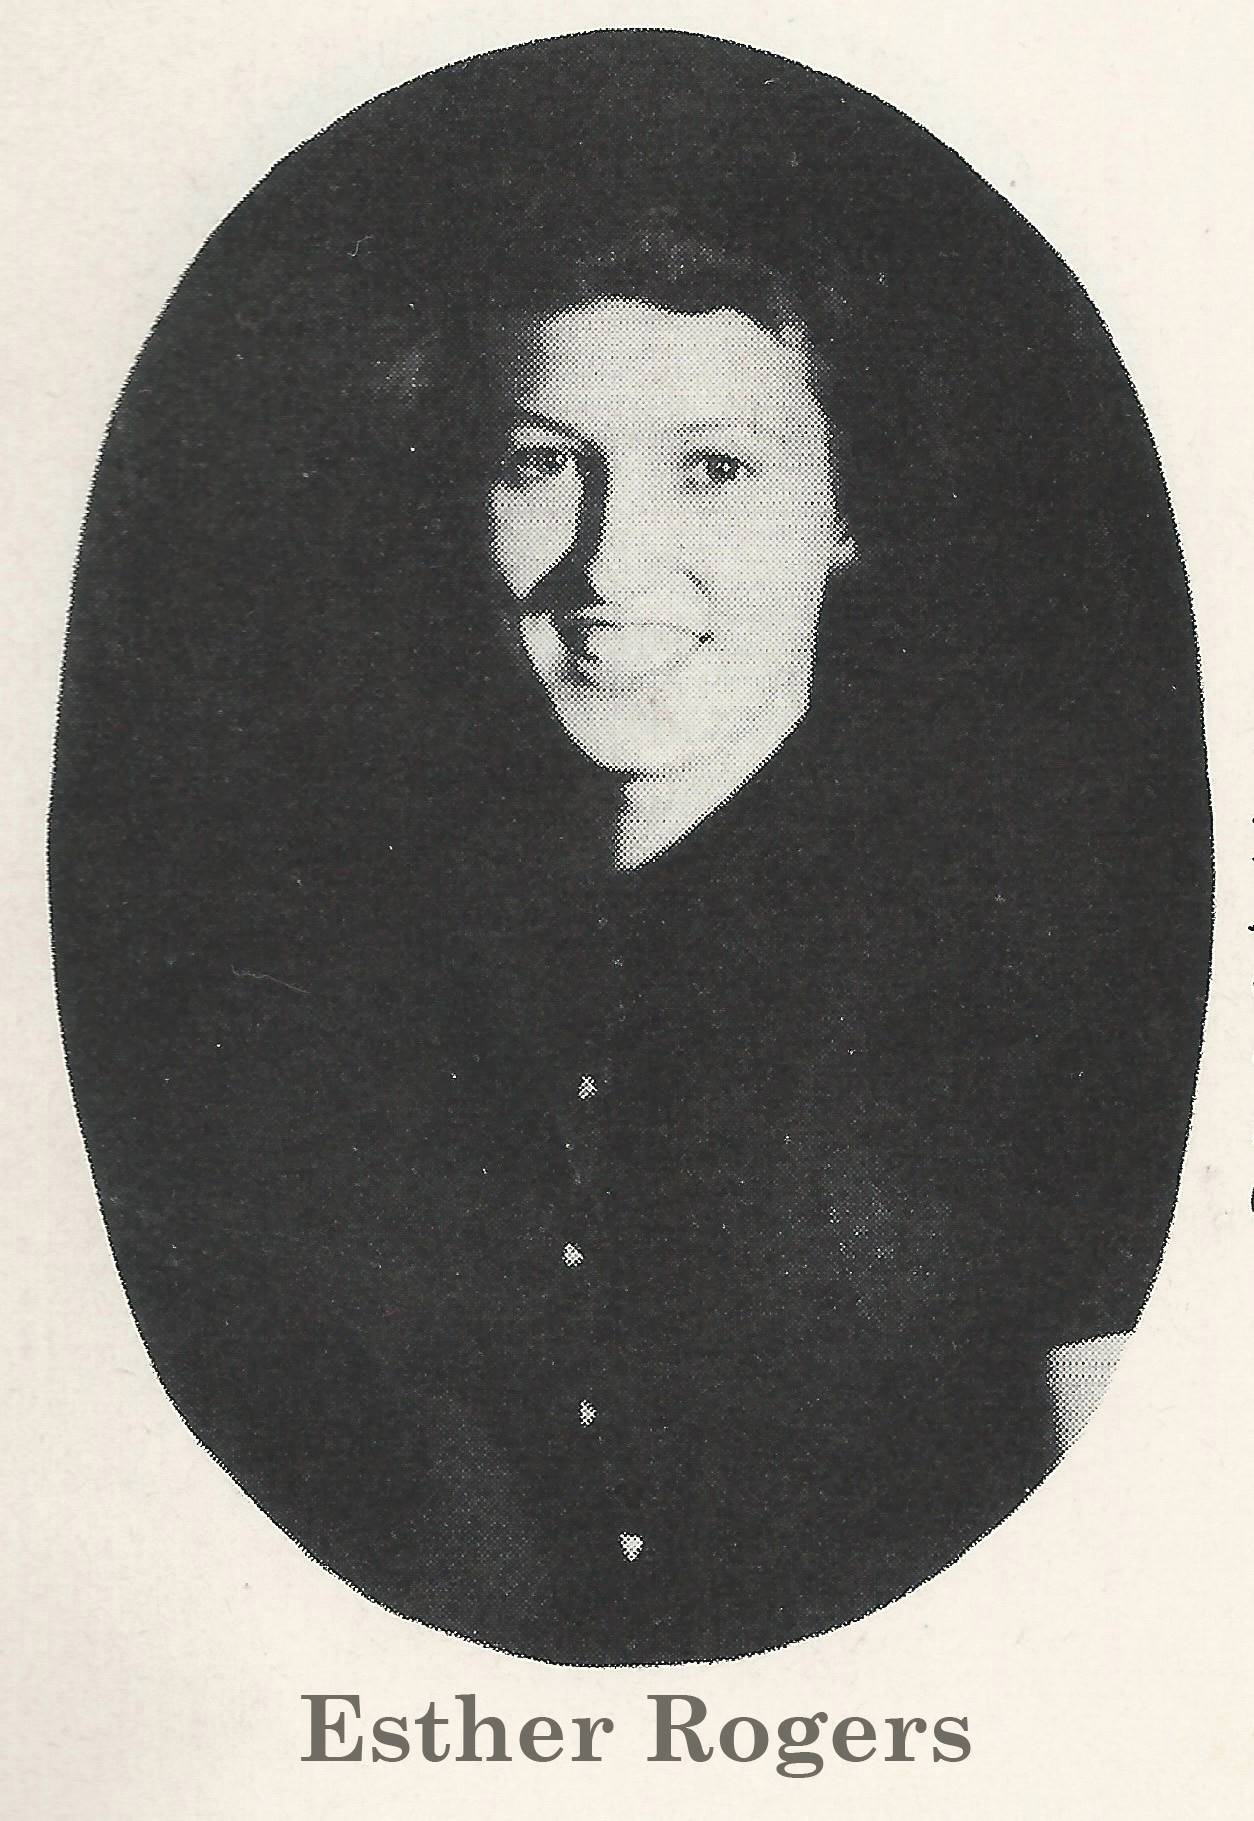 Esther Rogers